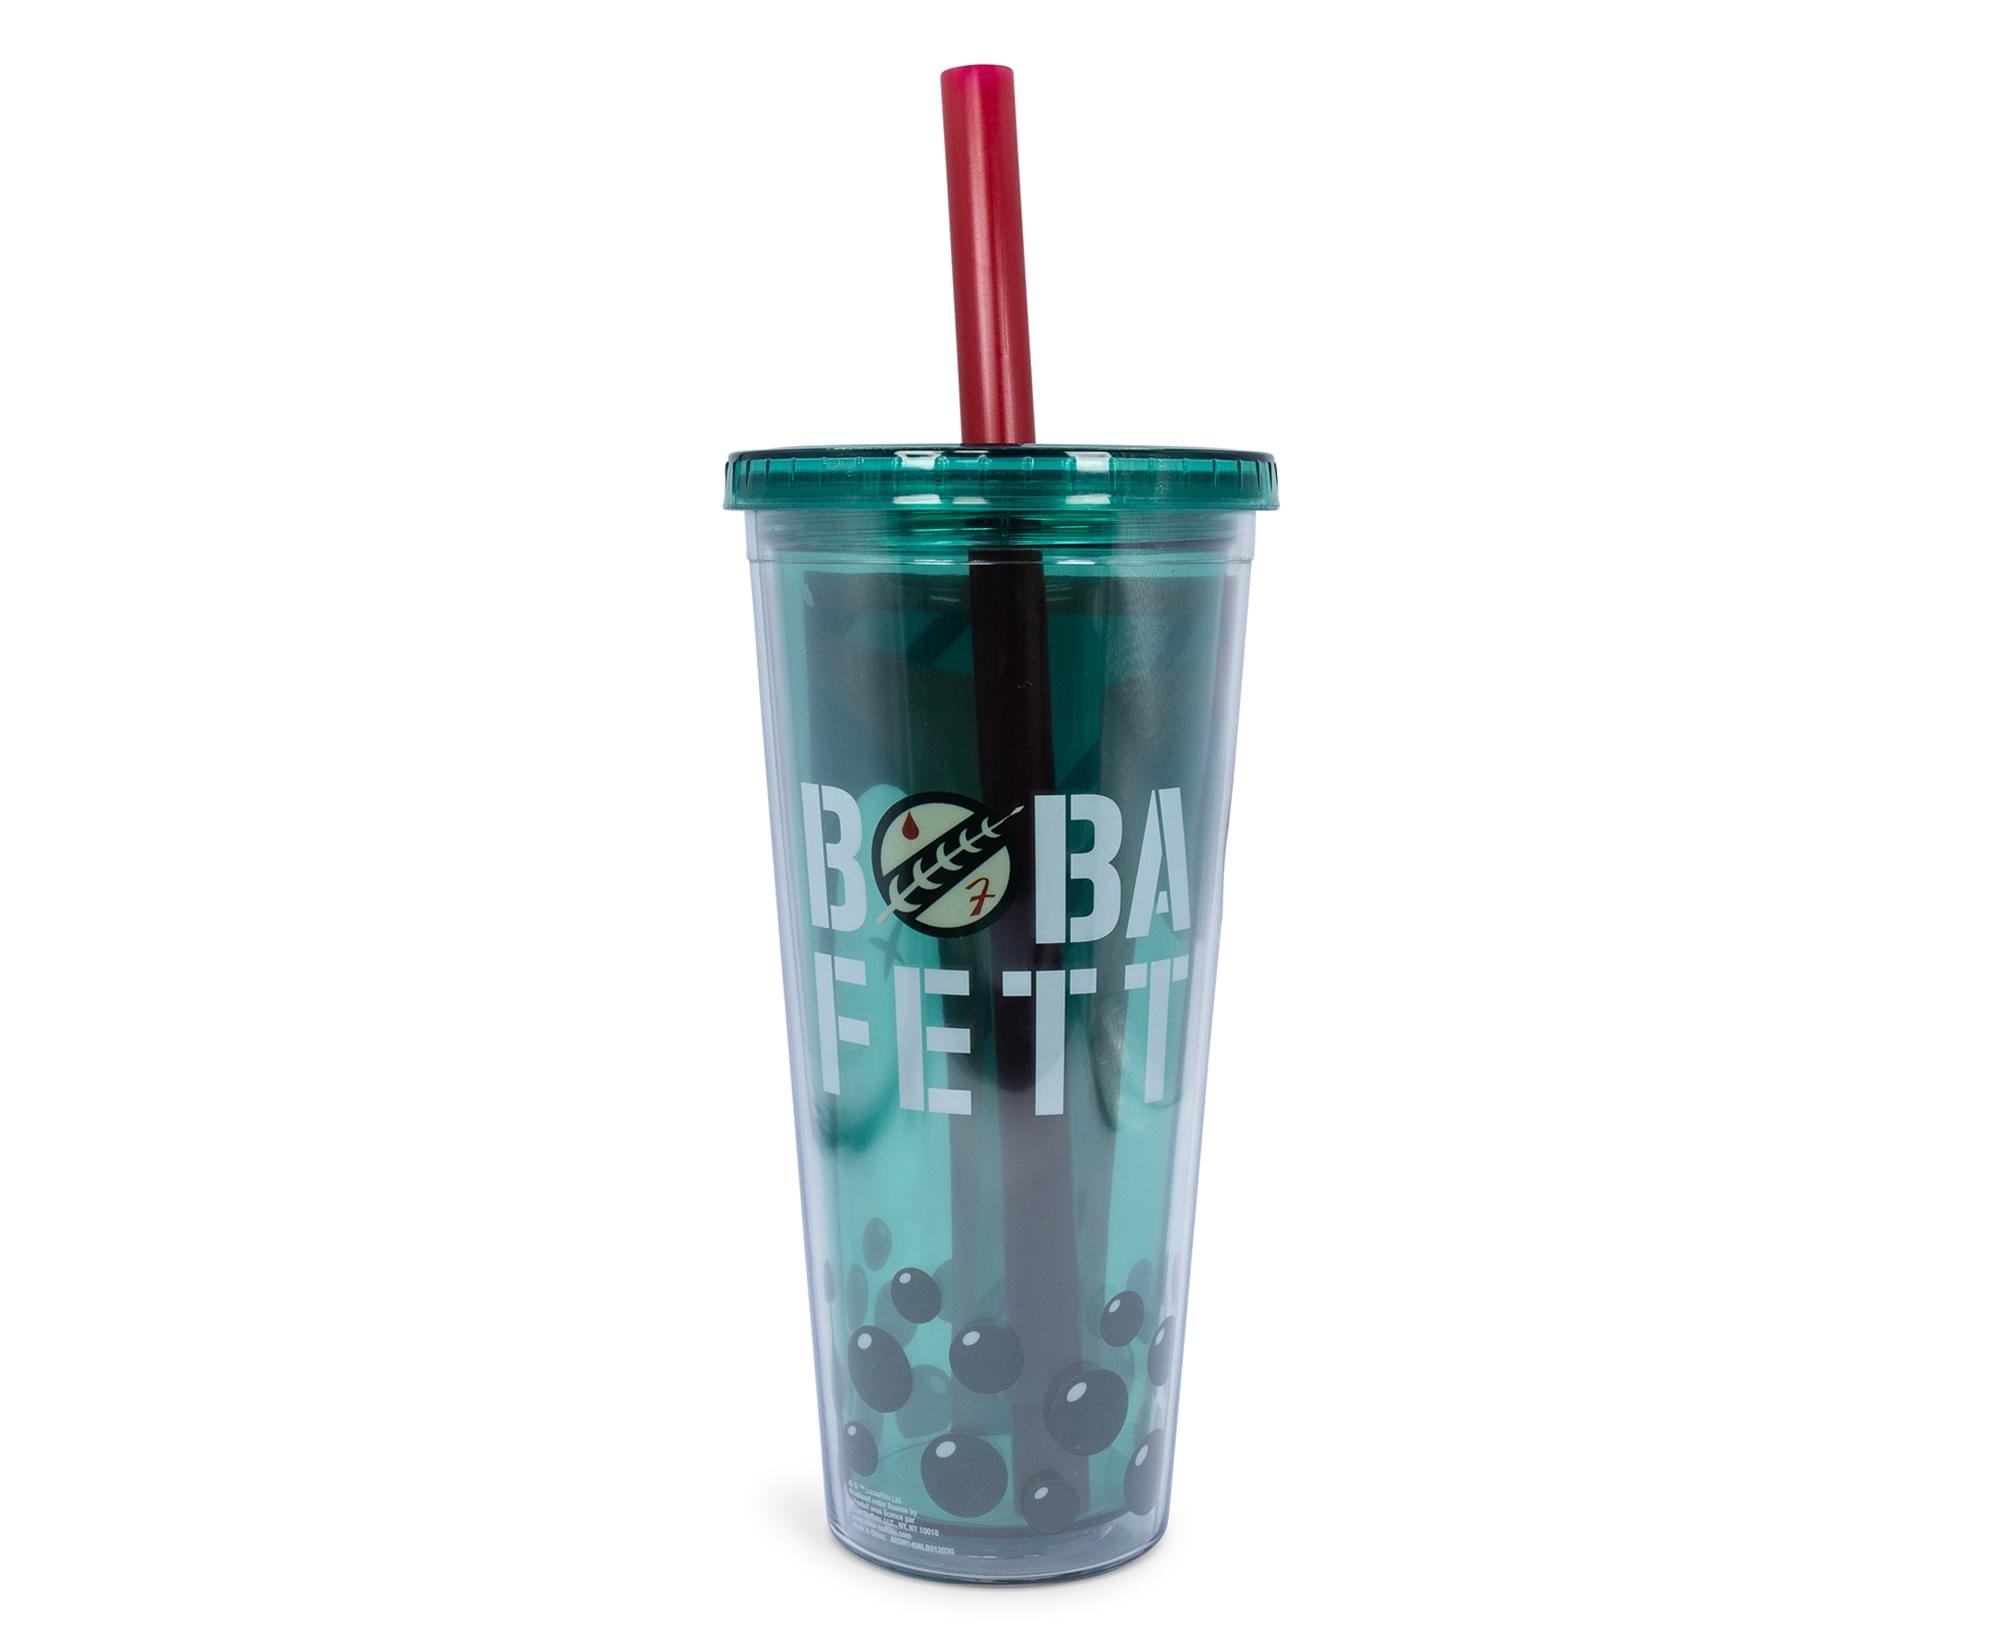 Star Wars Boba Fett Plastic Carnival Cup With Lid And Straw , 24 Ounces